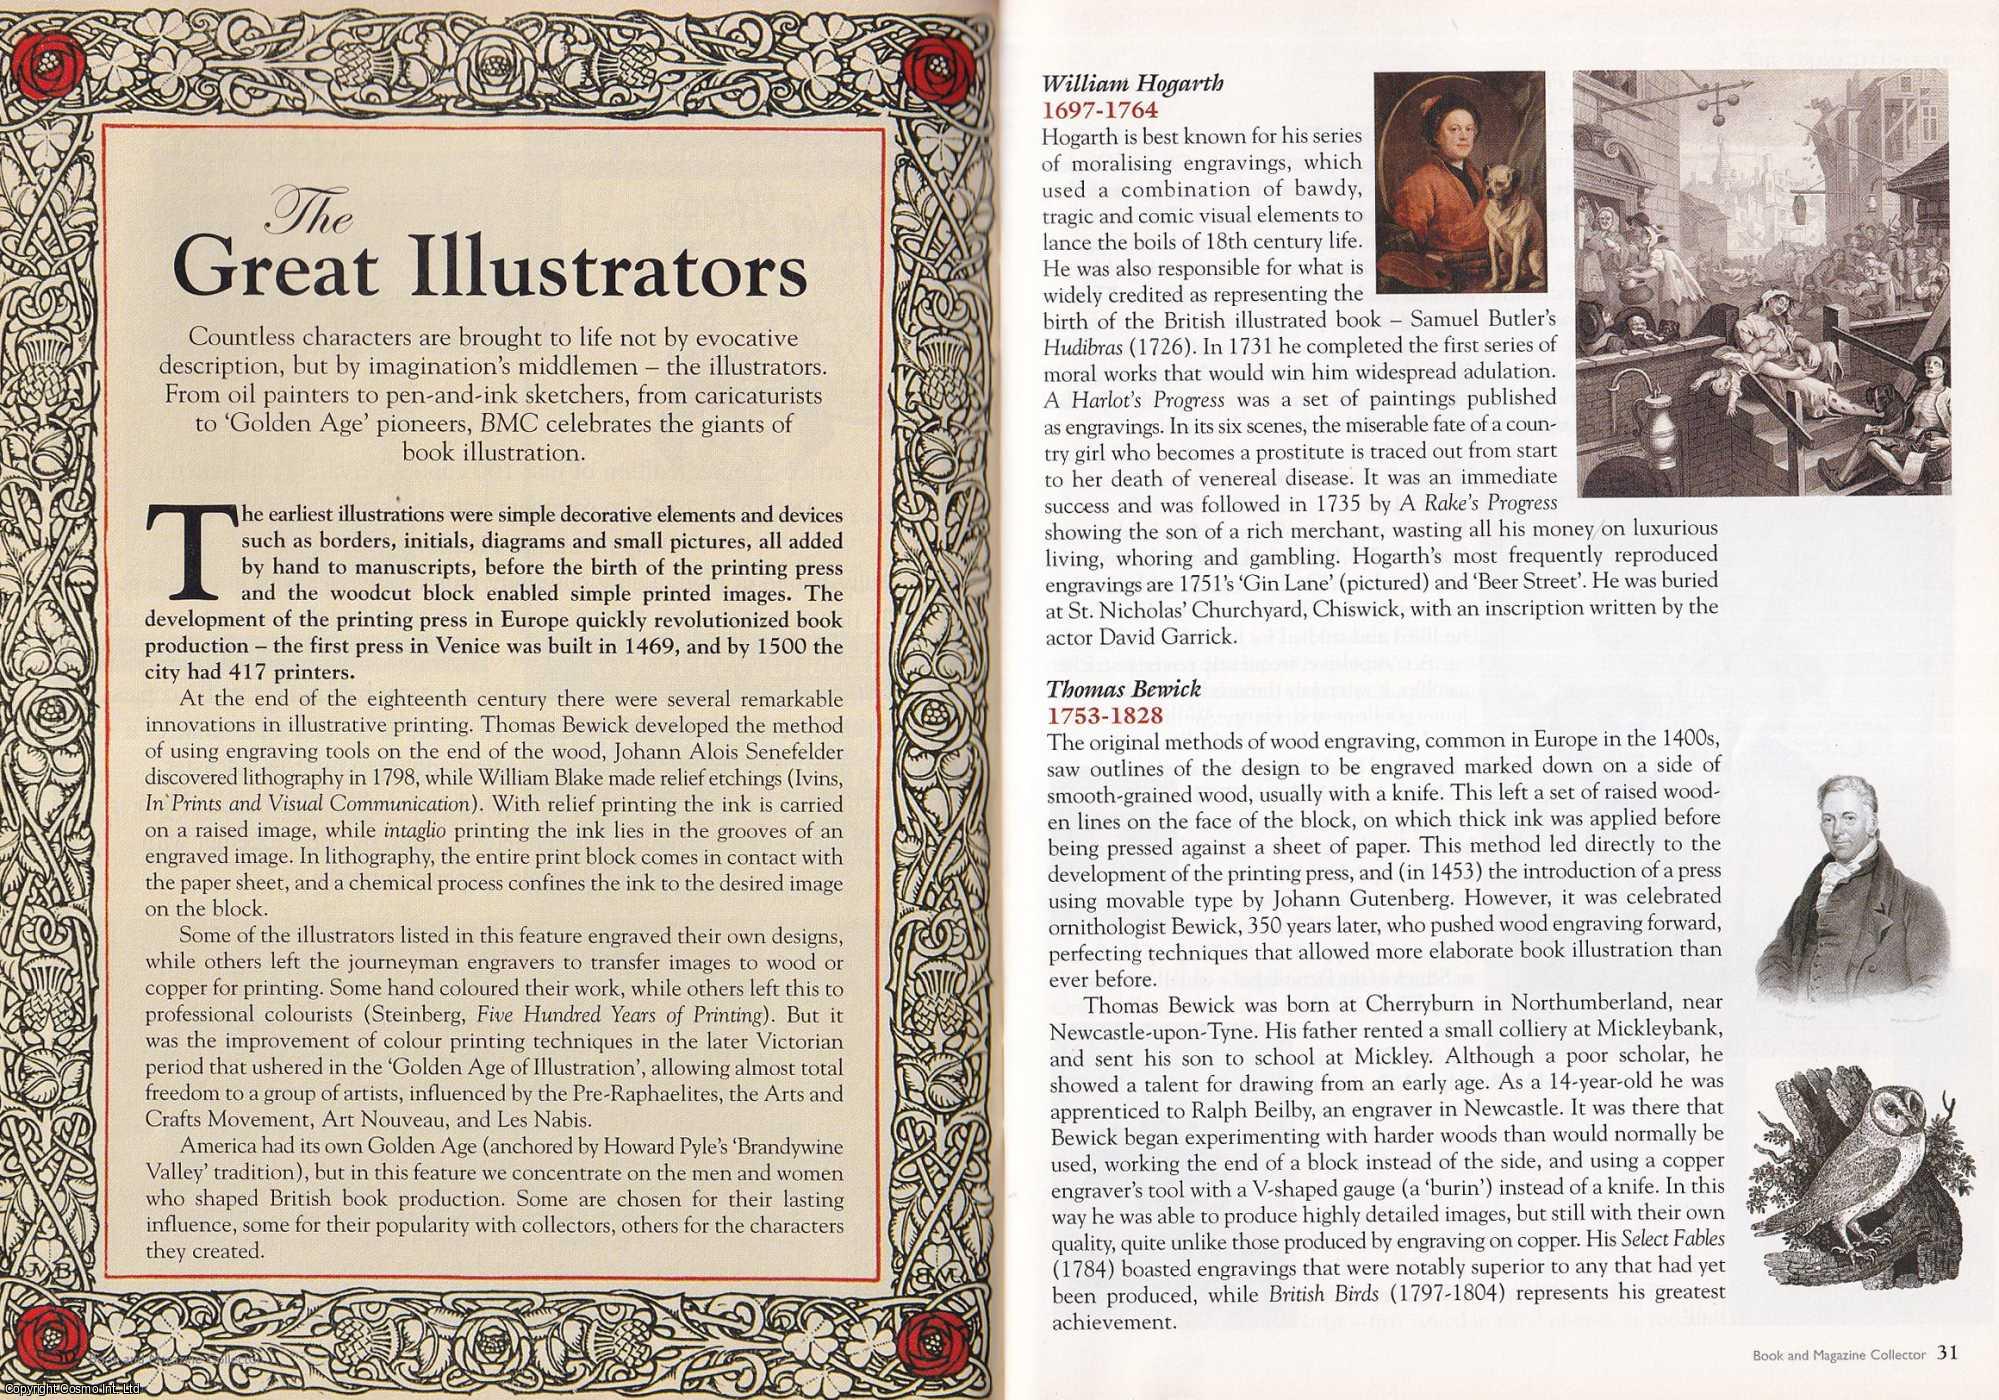 --- - The Great Illustrators. Celebrating The Giants of Book Illustration. This is an original article separated from an issue of The Book & Magazine Collector publication.